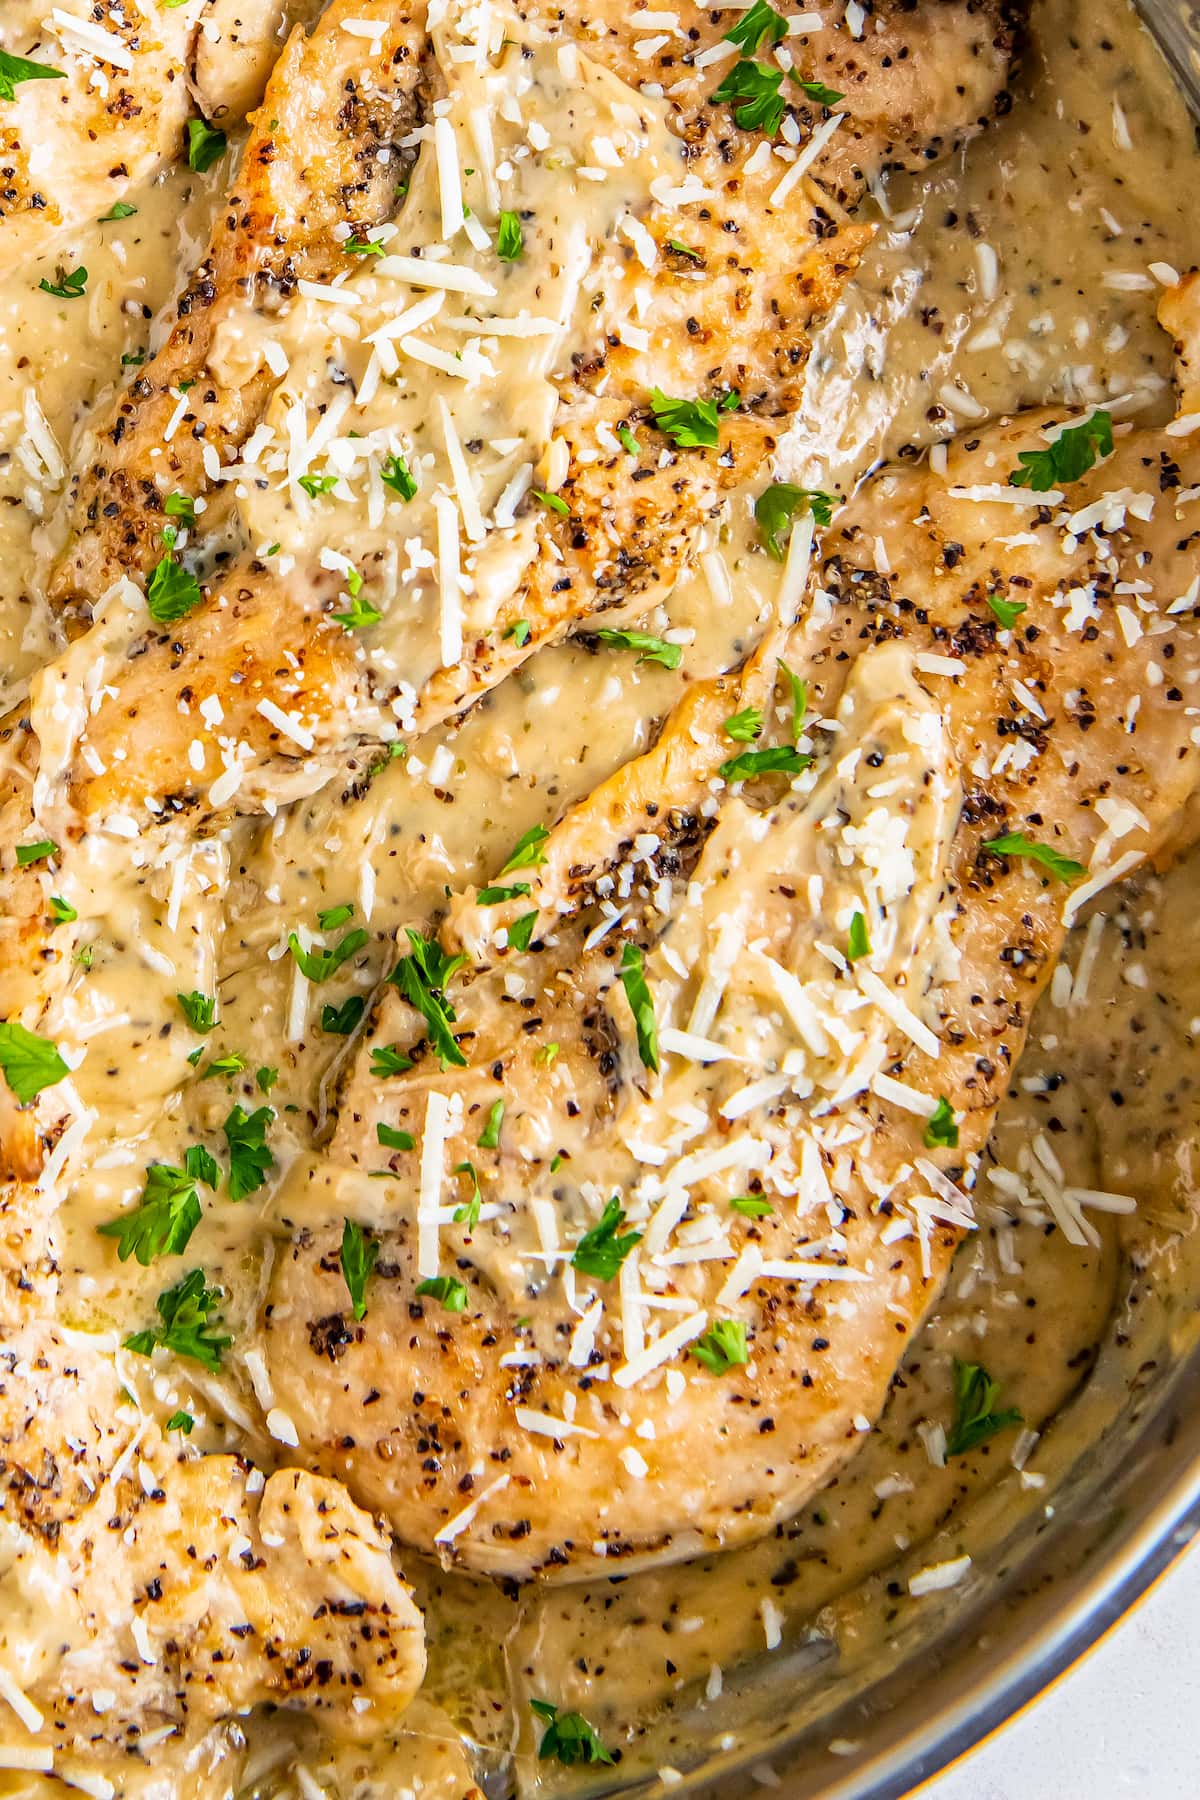 Chicken breasts are topped with cheese and fresh herbs.